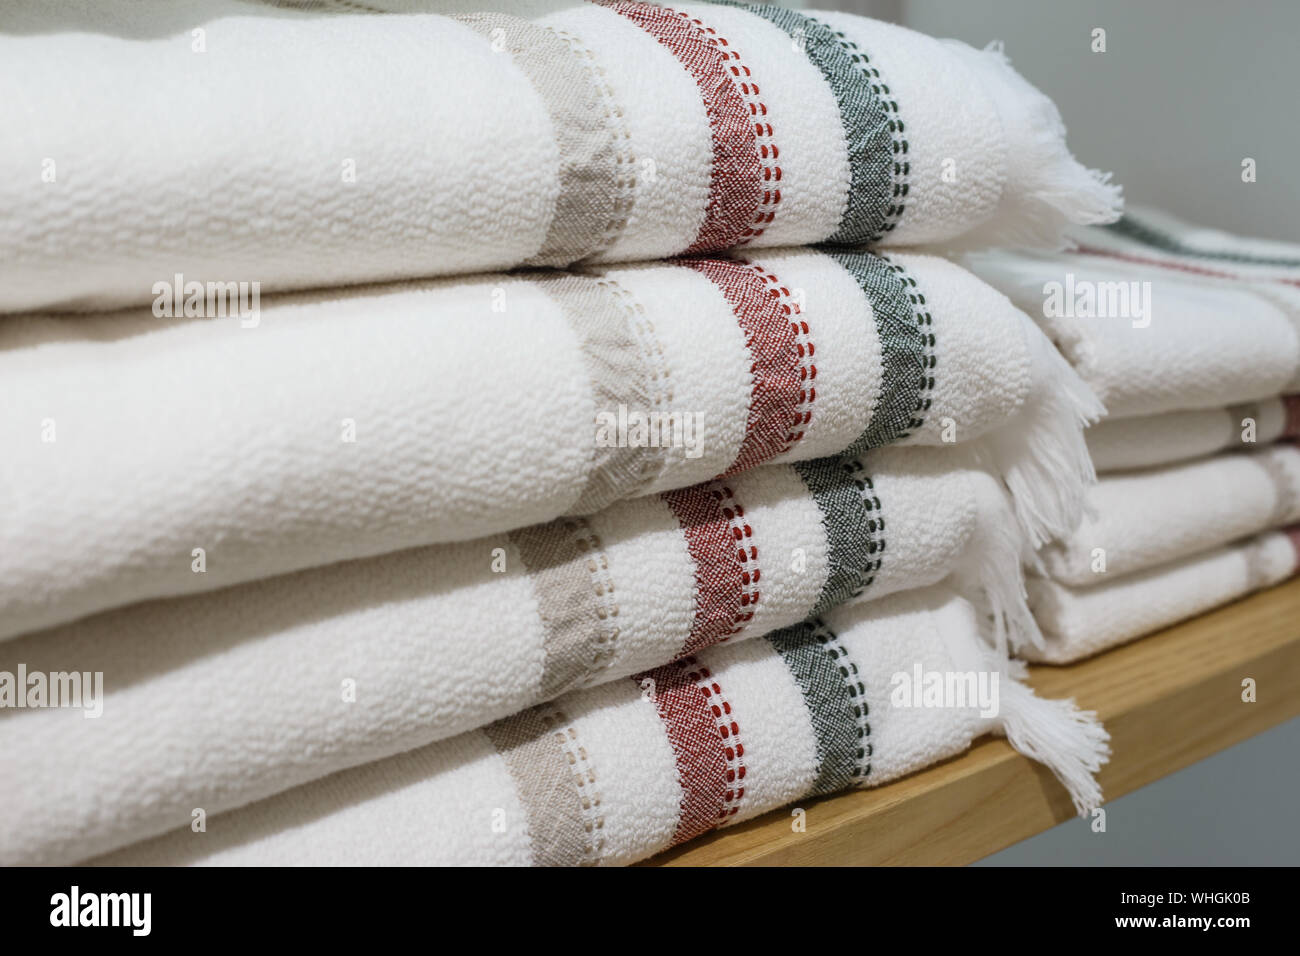 Shelves with towels stacks in shop. Hygge or another scandinavian style. Stock Photo